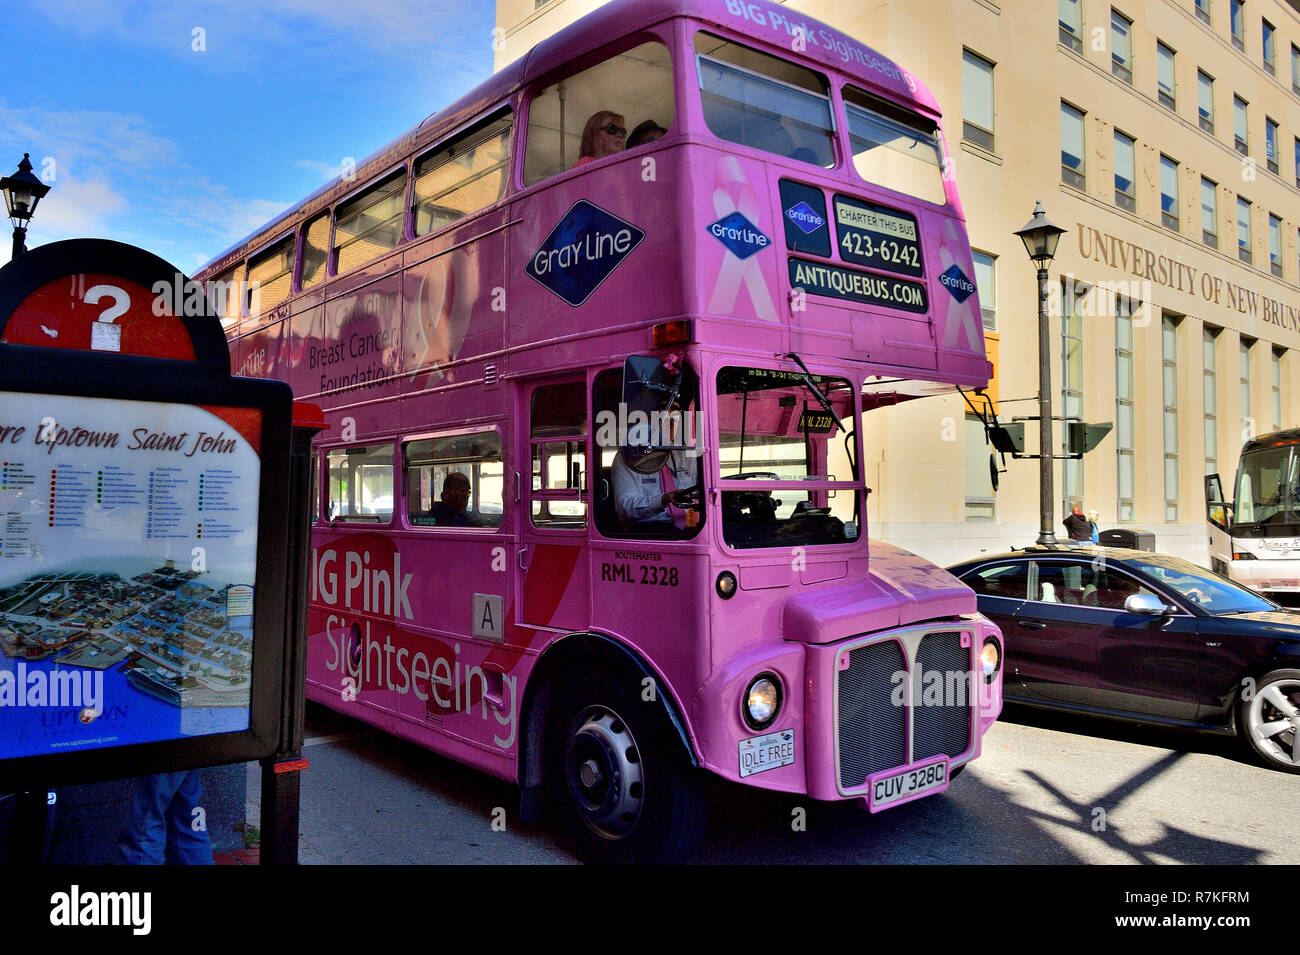 A pink double deck tour bus traveling on the street in Saint John New Brunswick Canada. Stock Photo